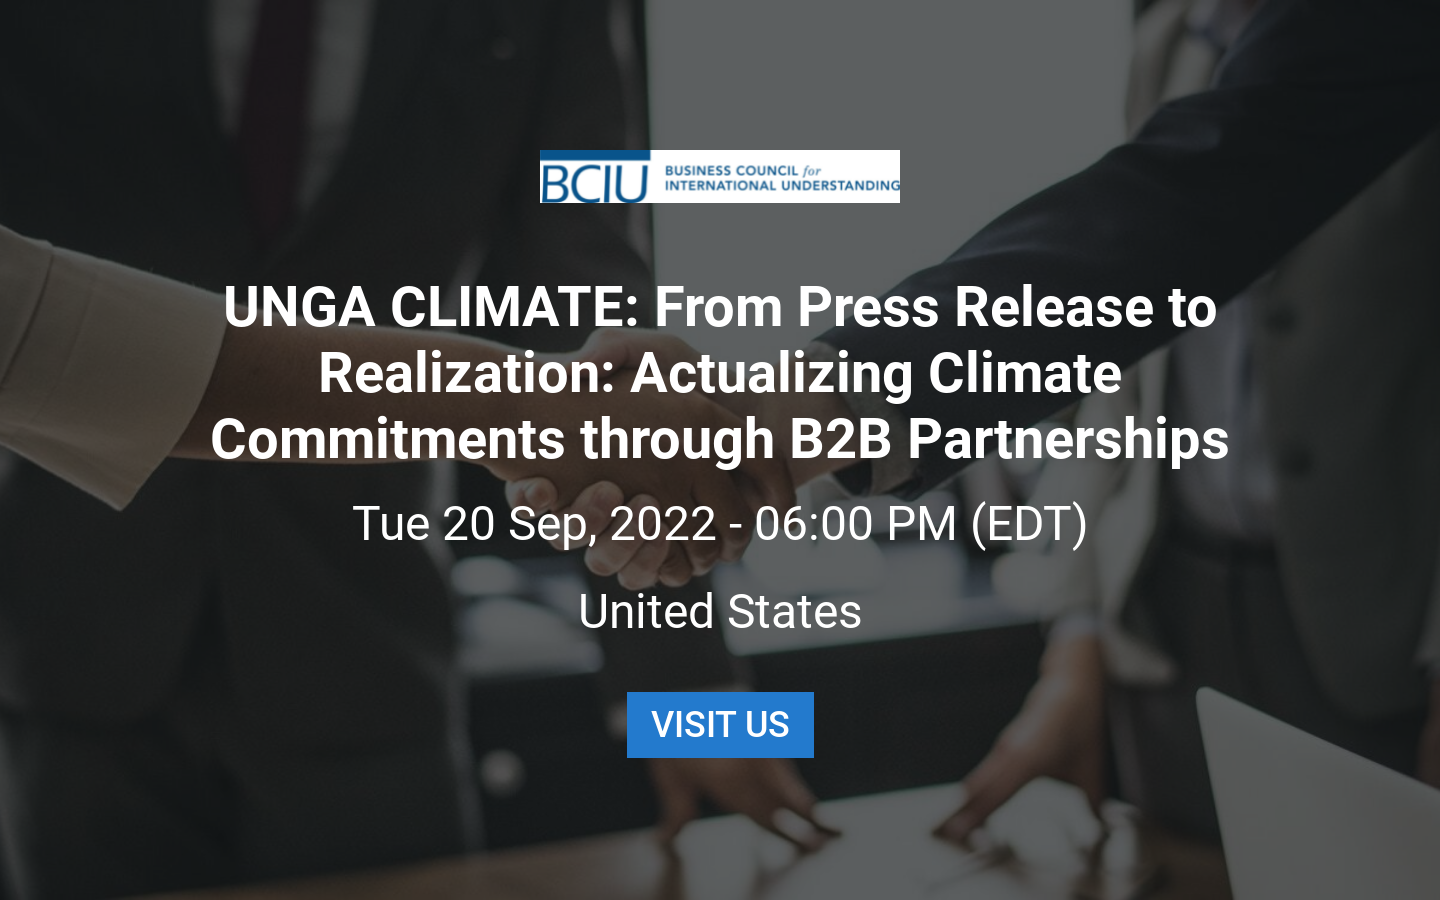 UNGA CLIMATE: From Press Release to Realization: Actualizing Climate